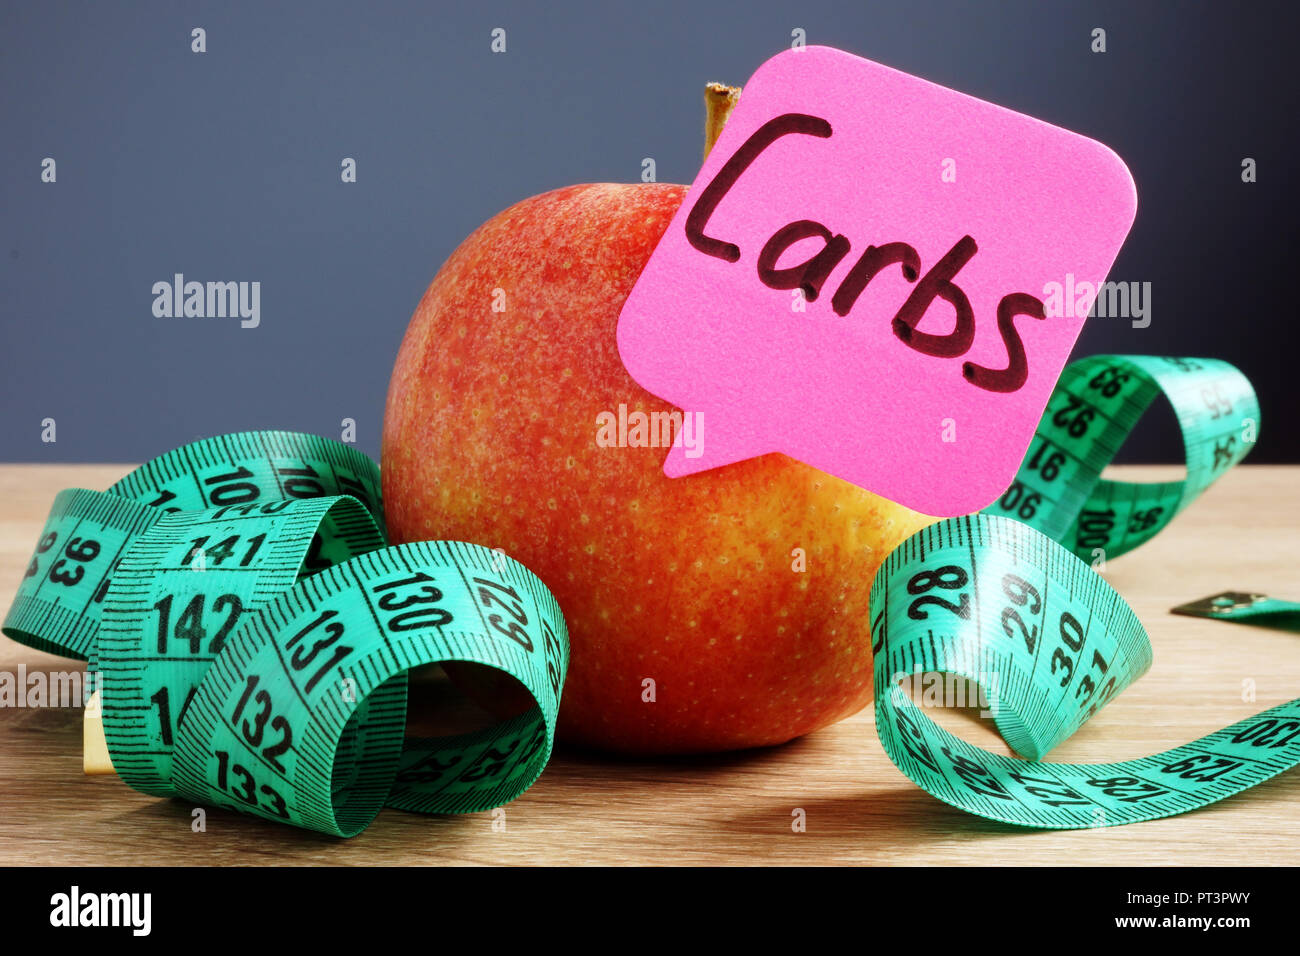 Carbs or Carbohydrates concept. Apple on a desk. Diets and healthy food. Stock Photo